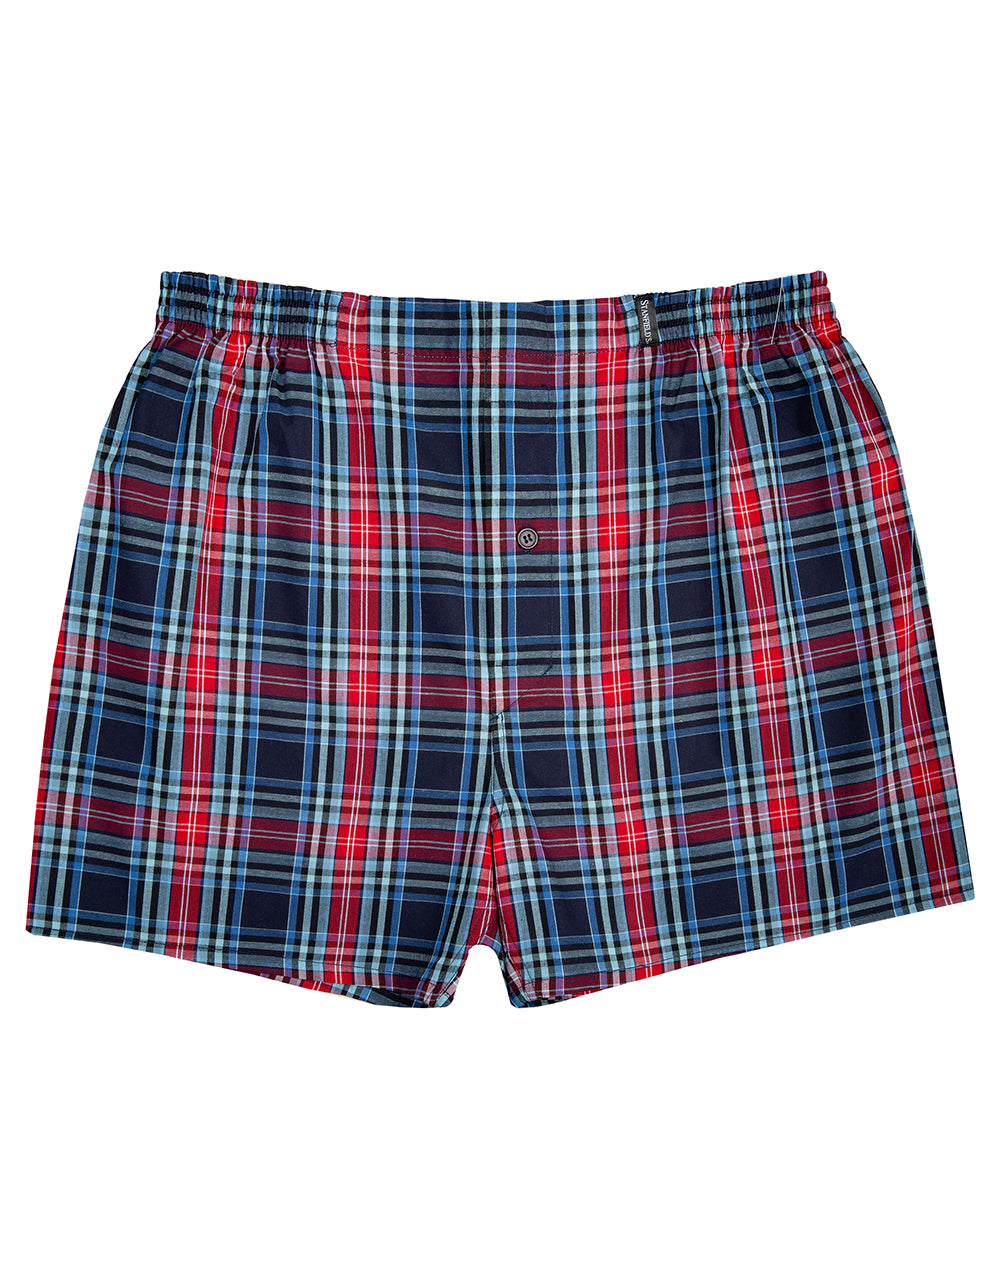 Quality Detail 6 Pack Of XL Classic Woven Boxers